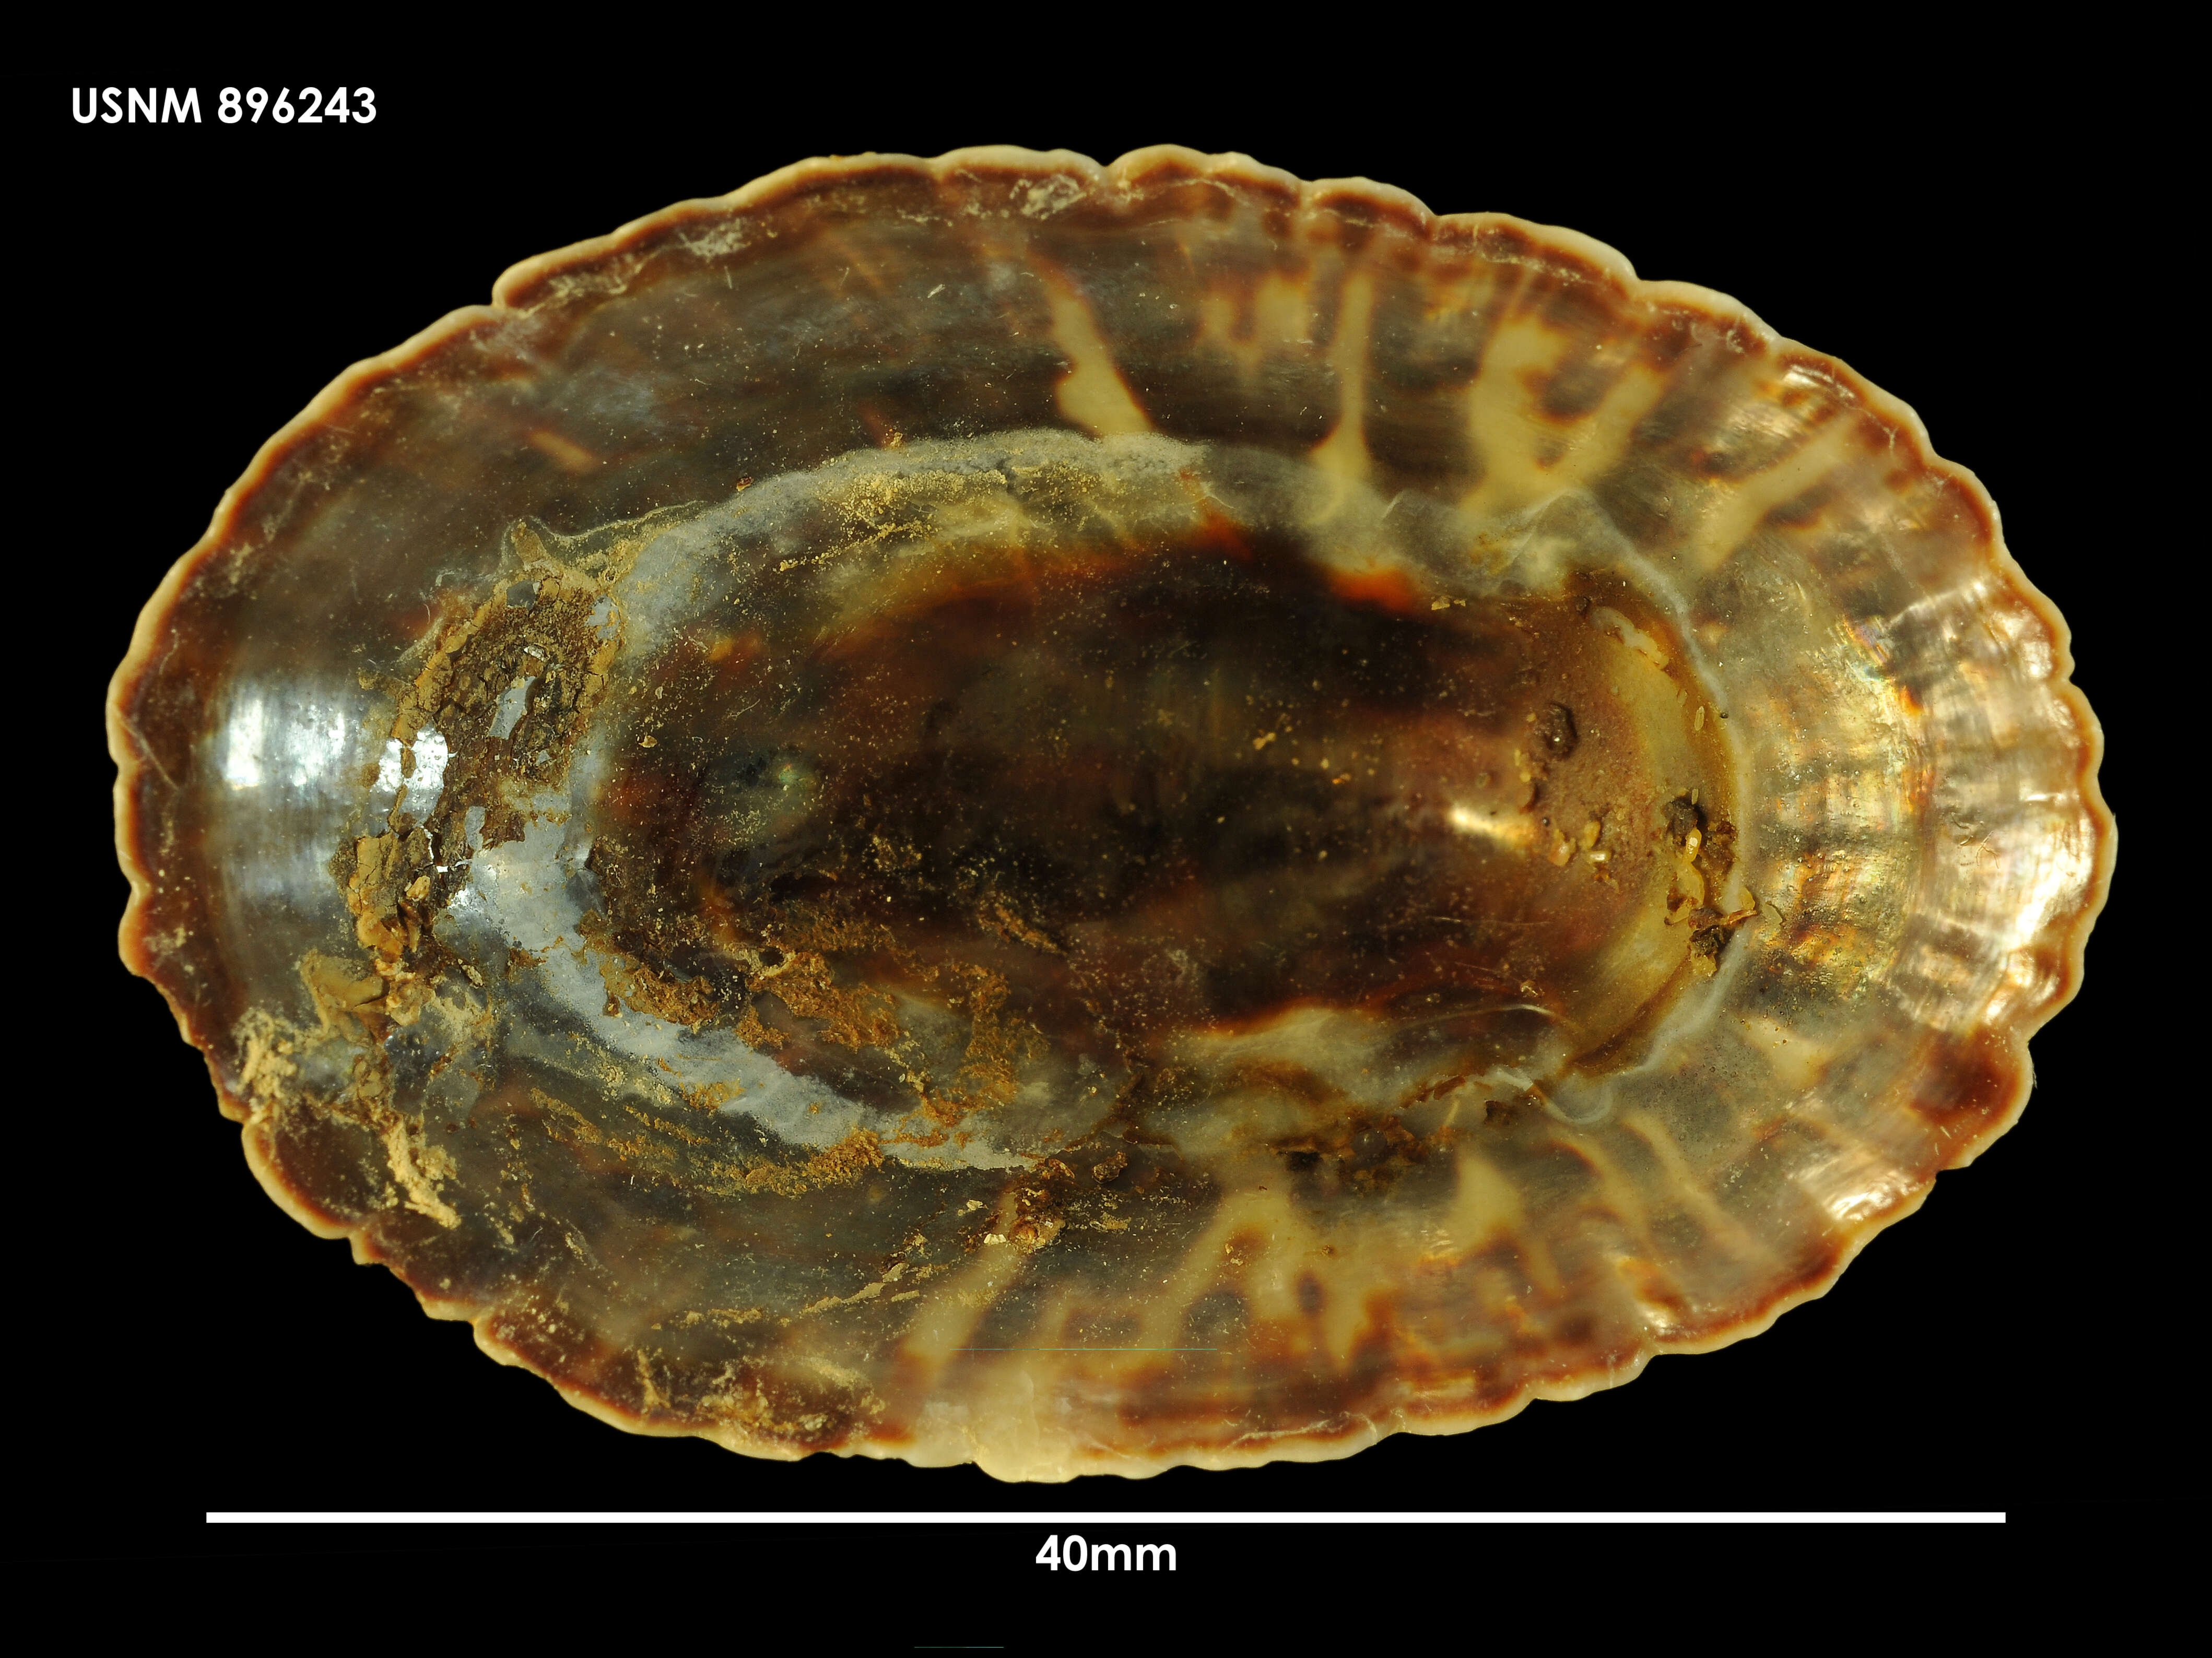 Image of golden limpet